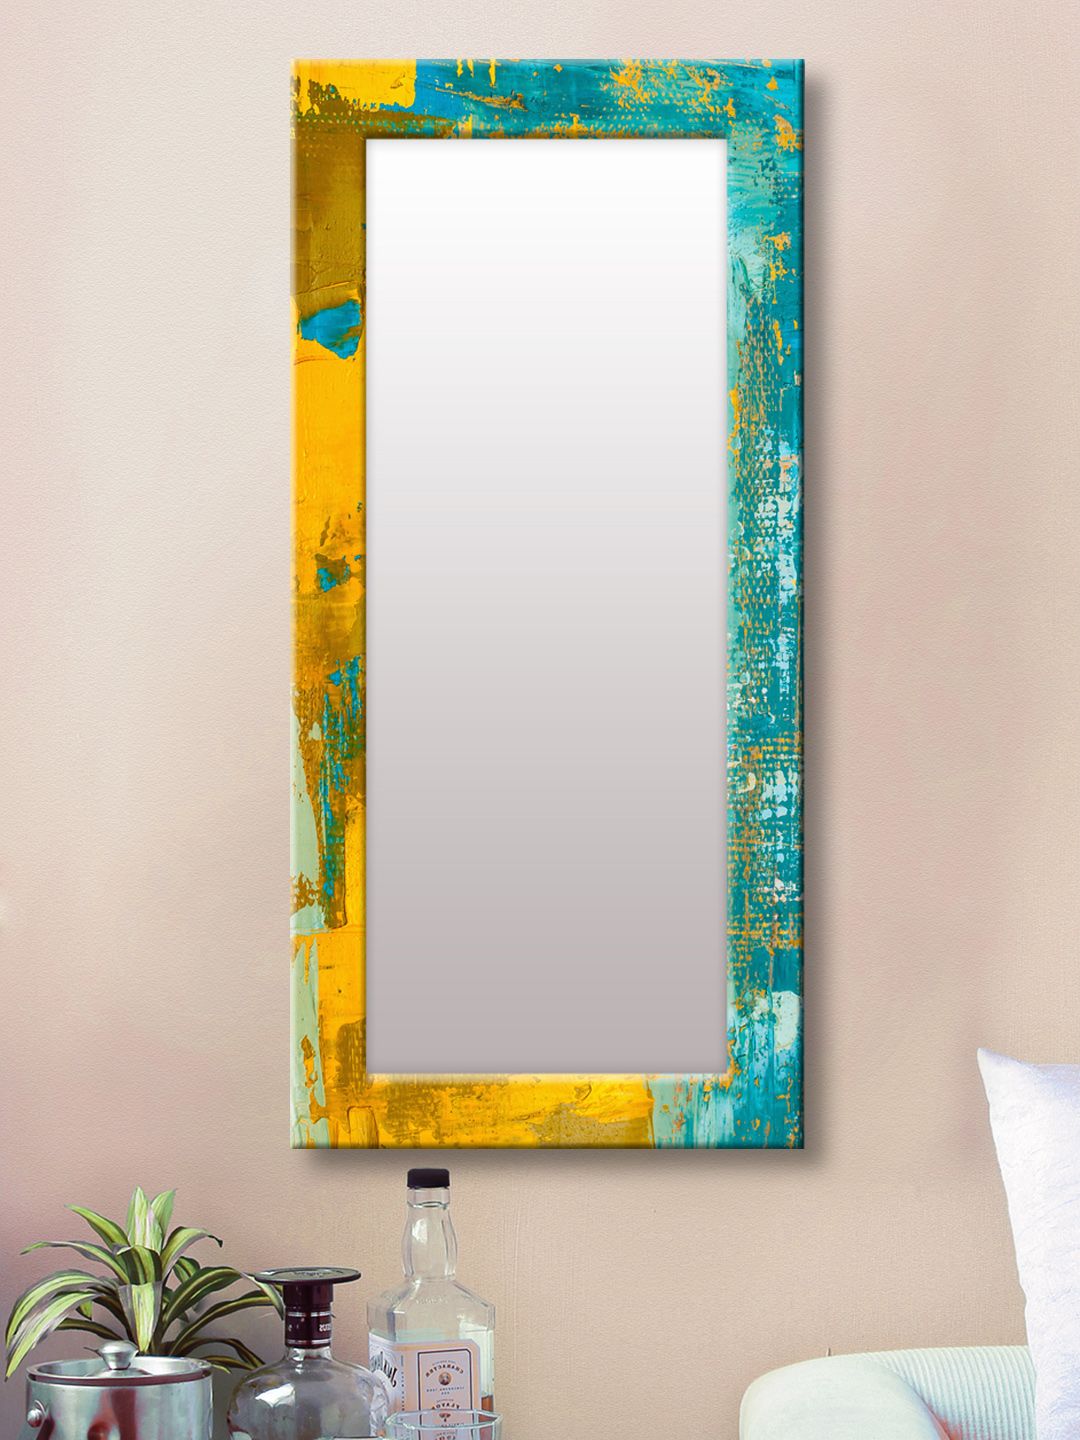 999Store Blue & Yellow Framed Wall Mirror Price in India